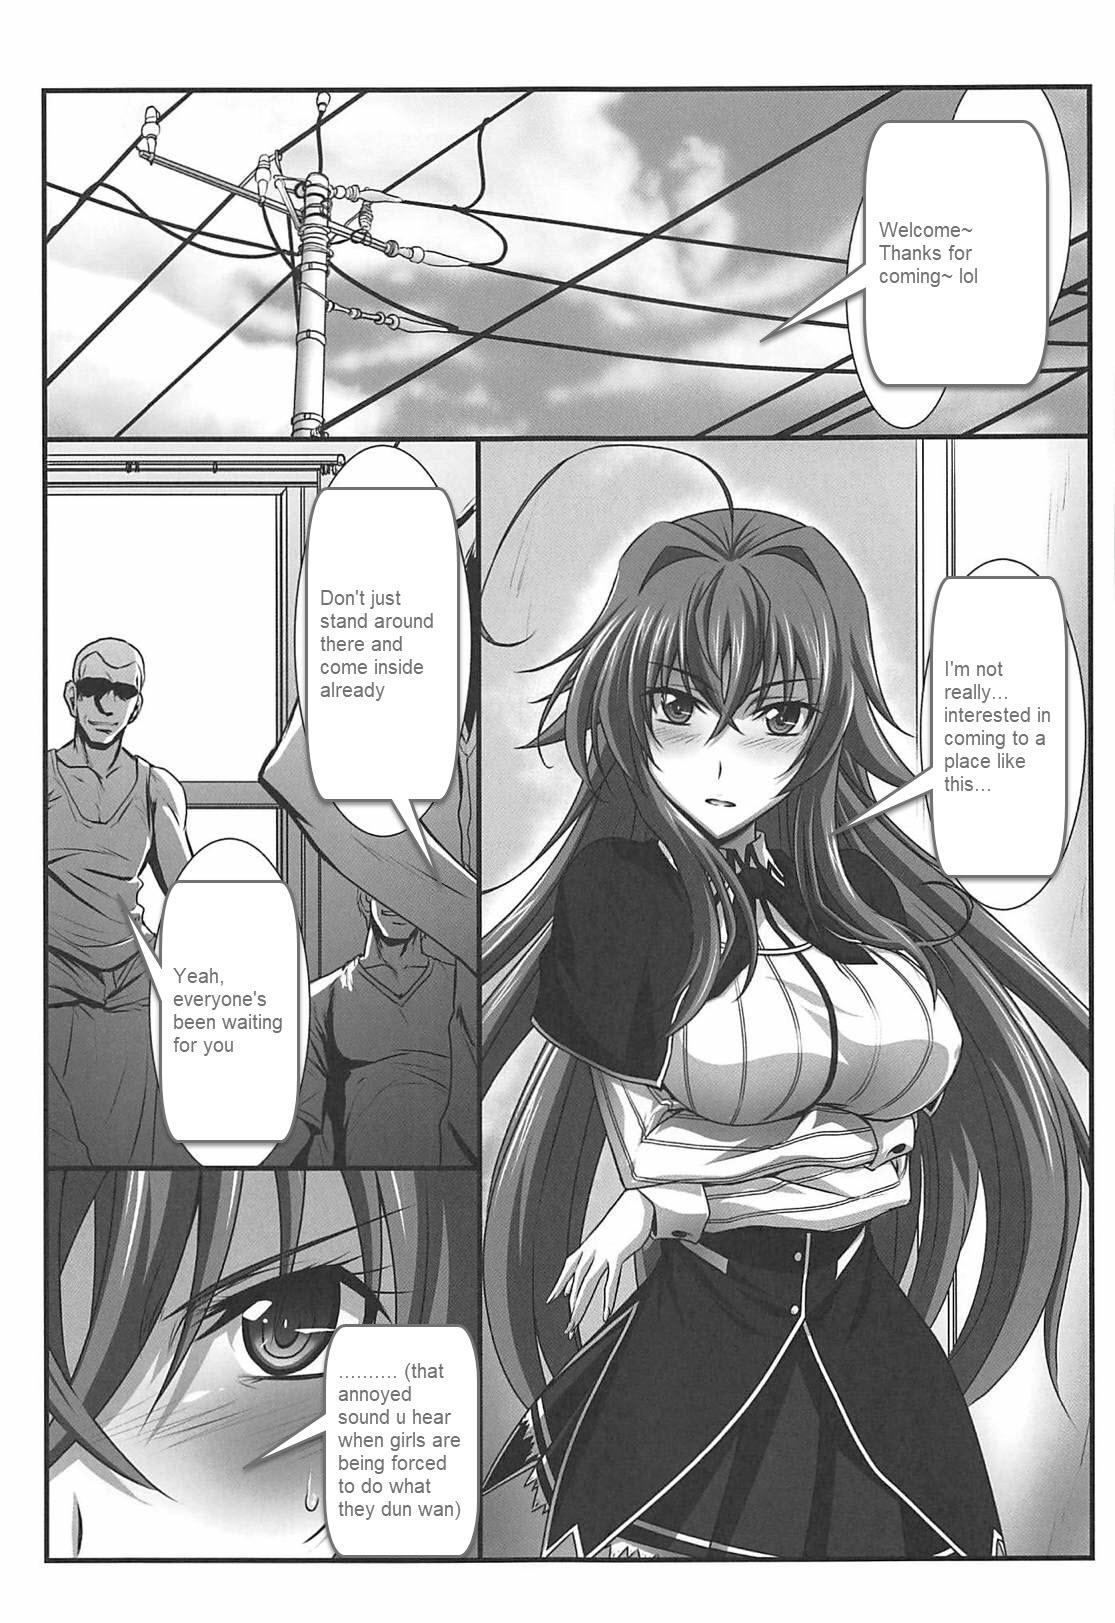 Glamour SPIRAL ZONE DxD II - Highschool dxd Mother fuck - Page 4